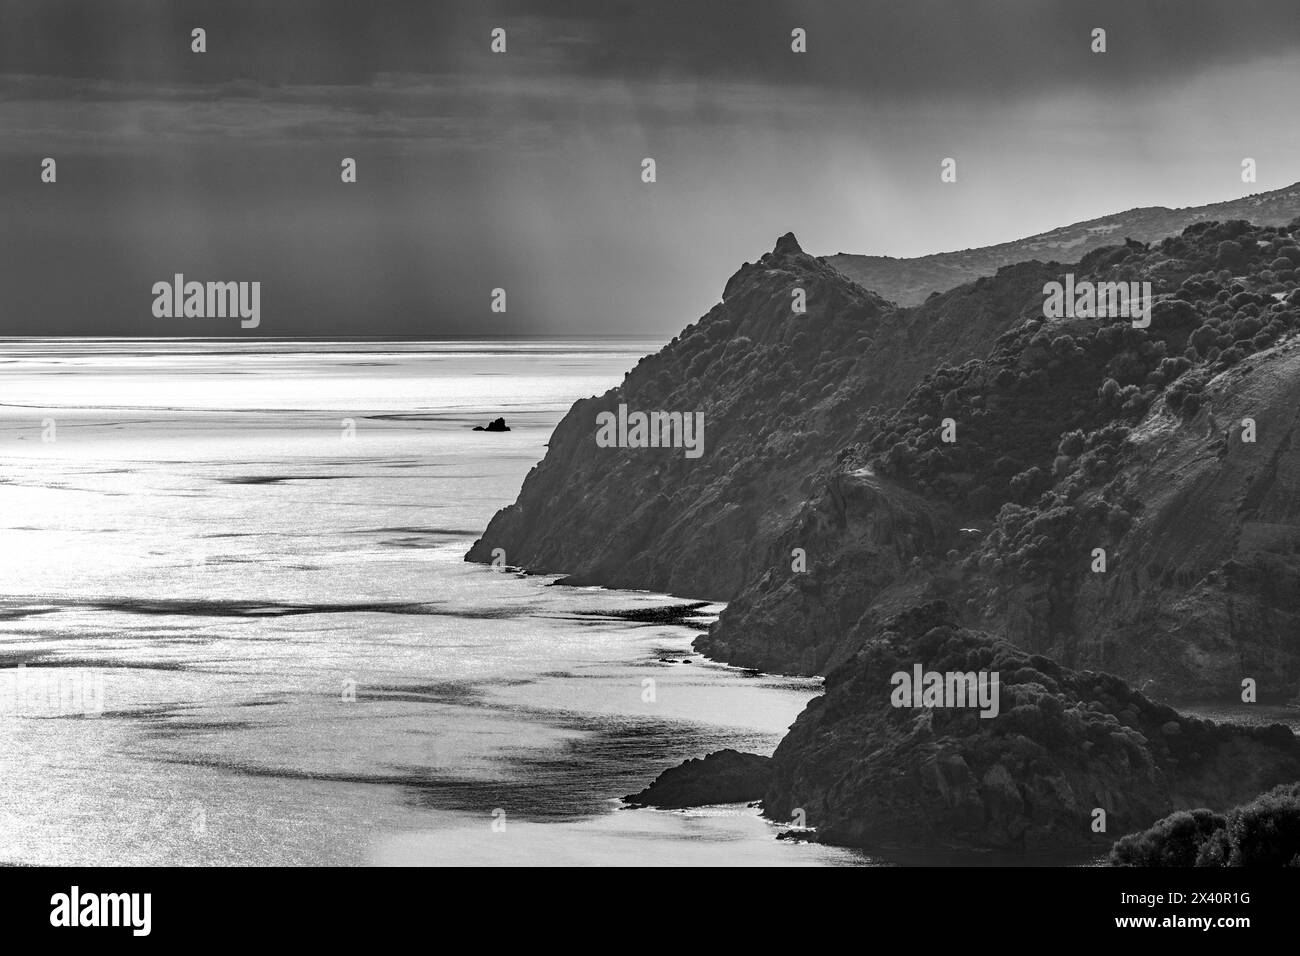 Black and white image of a coastal view of the Sardinian cliffs overlooking the Mediterranean Sea with sunrays shining though the dark clouds Stock Photo